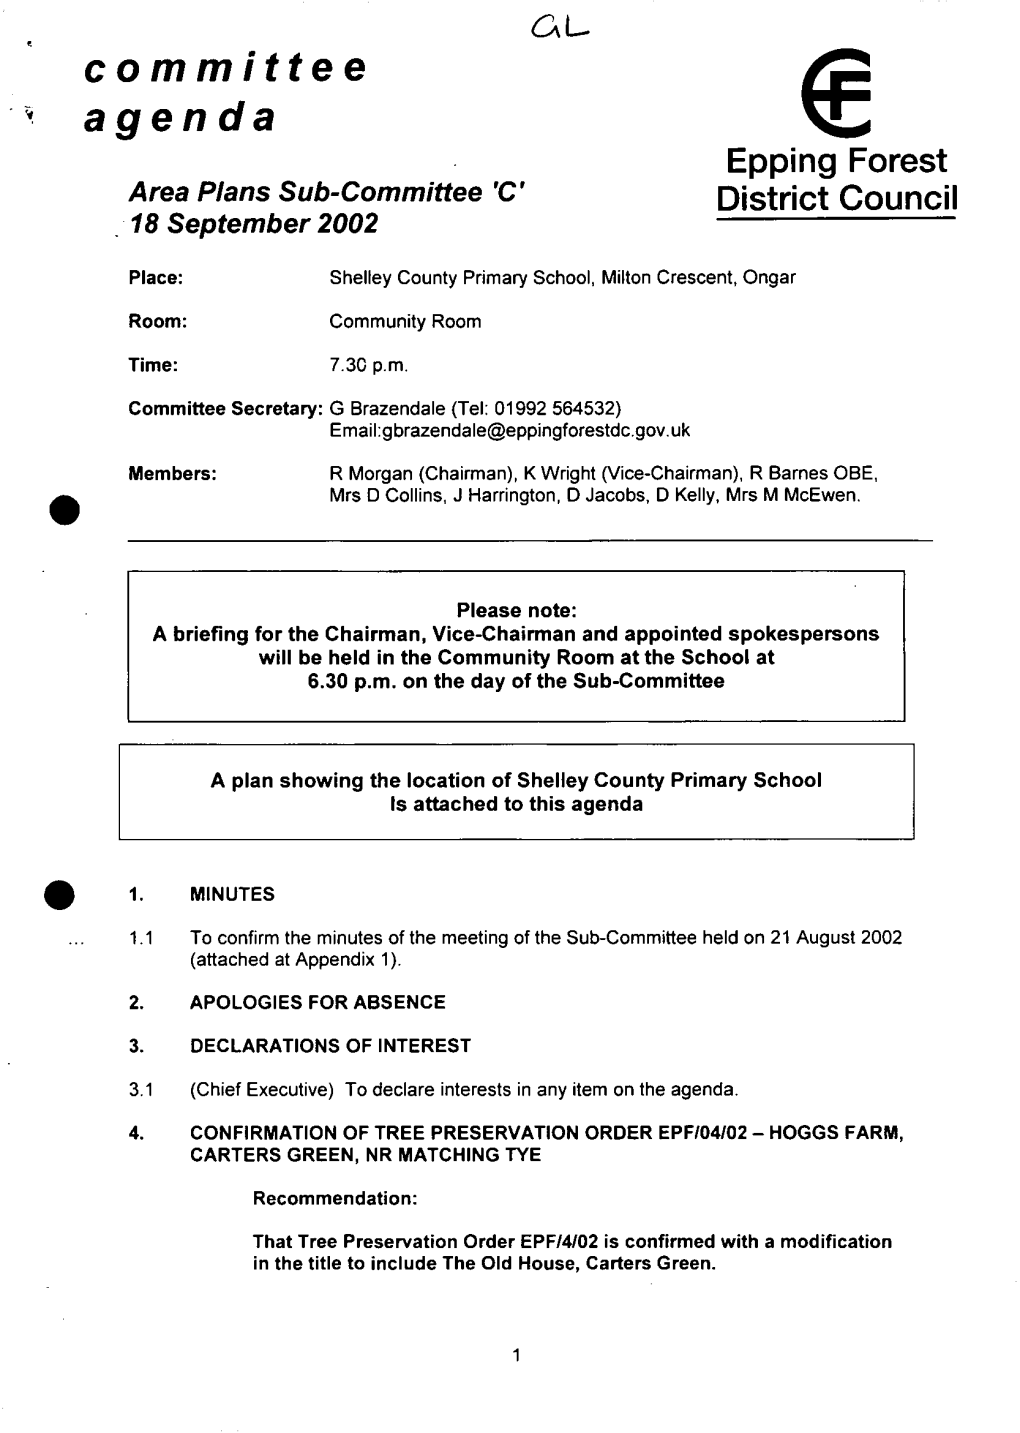 Committee Agenda Epping Forest Area Plans Sub-Committee 'C' District Council 18 September 2002